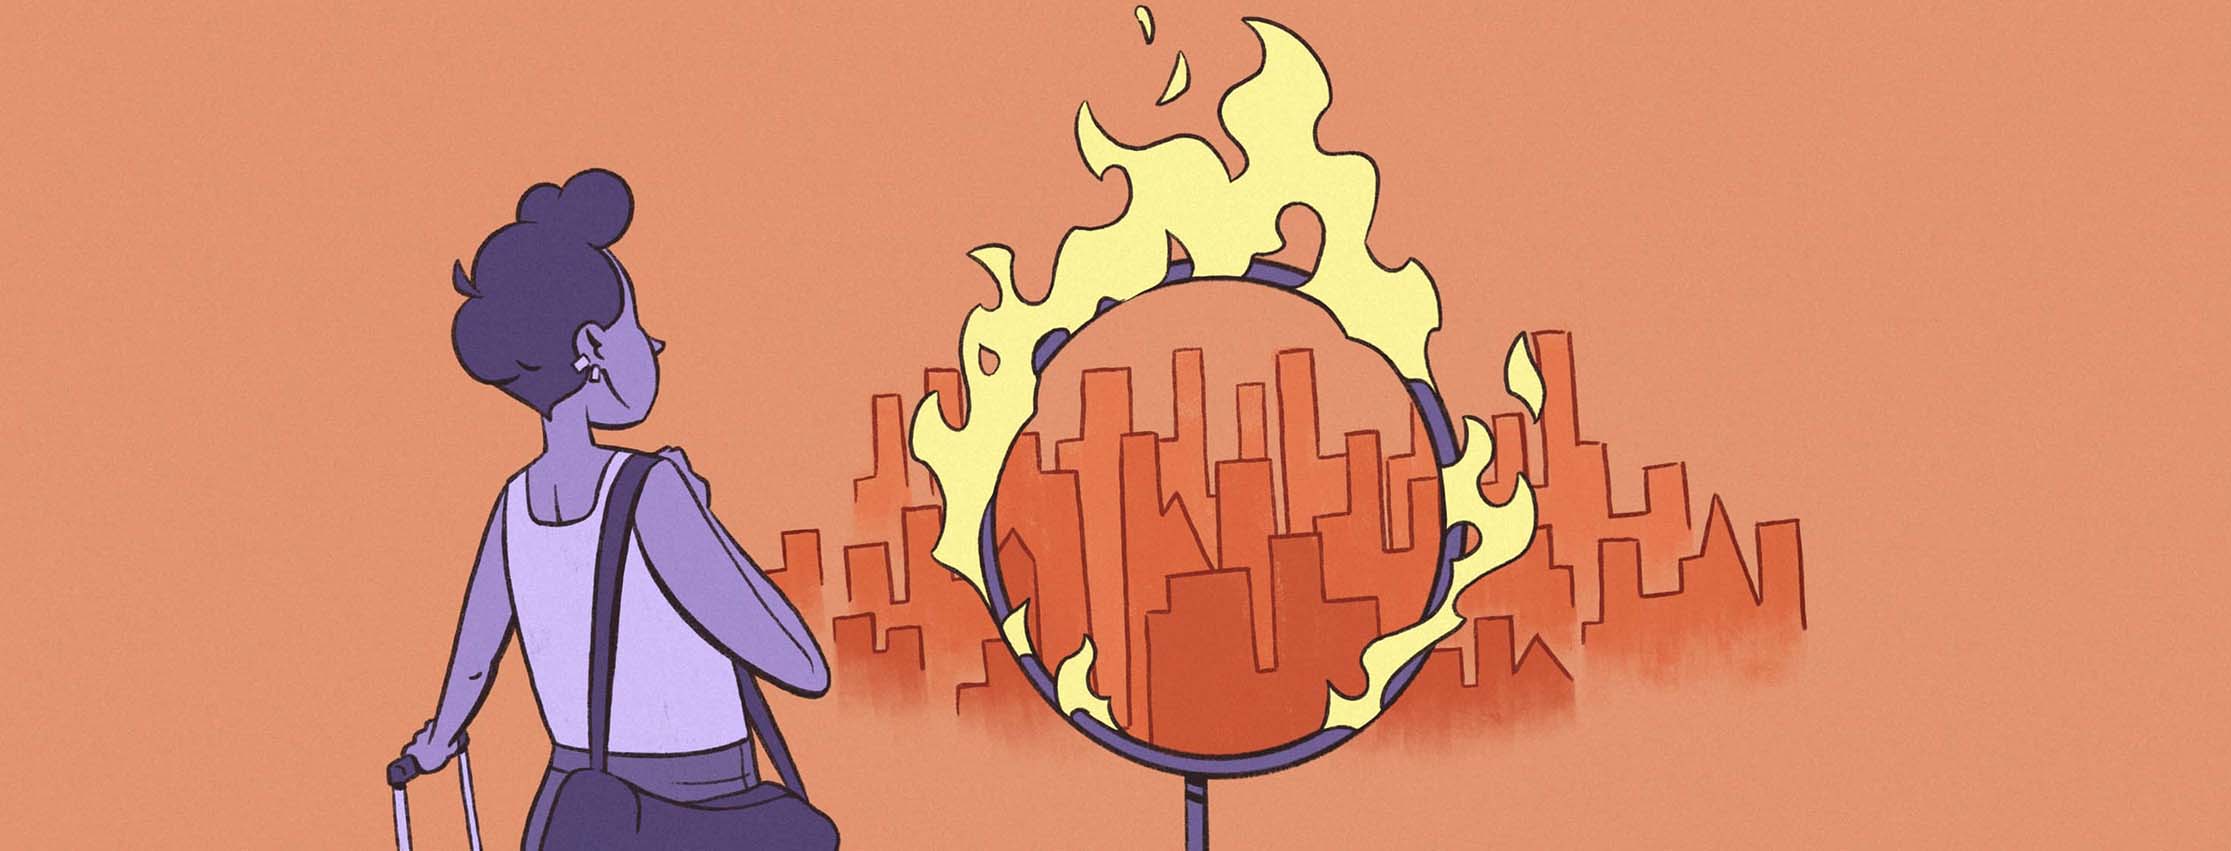 An adult woman with travel bags looks ahead to a city skyline, but a hoop of fire stands between her and the destination